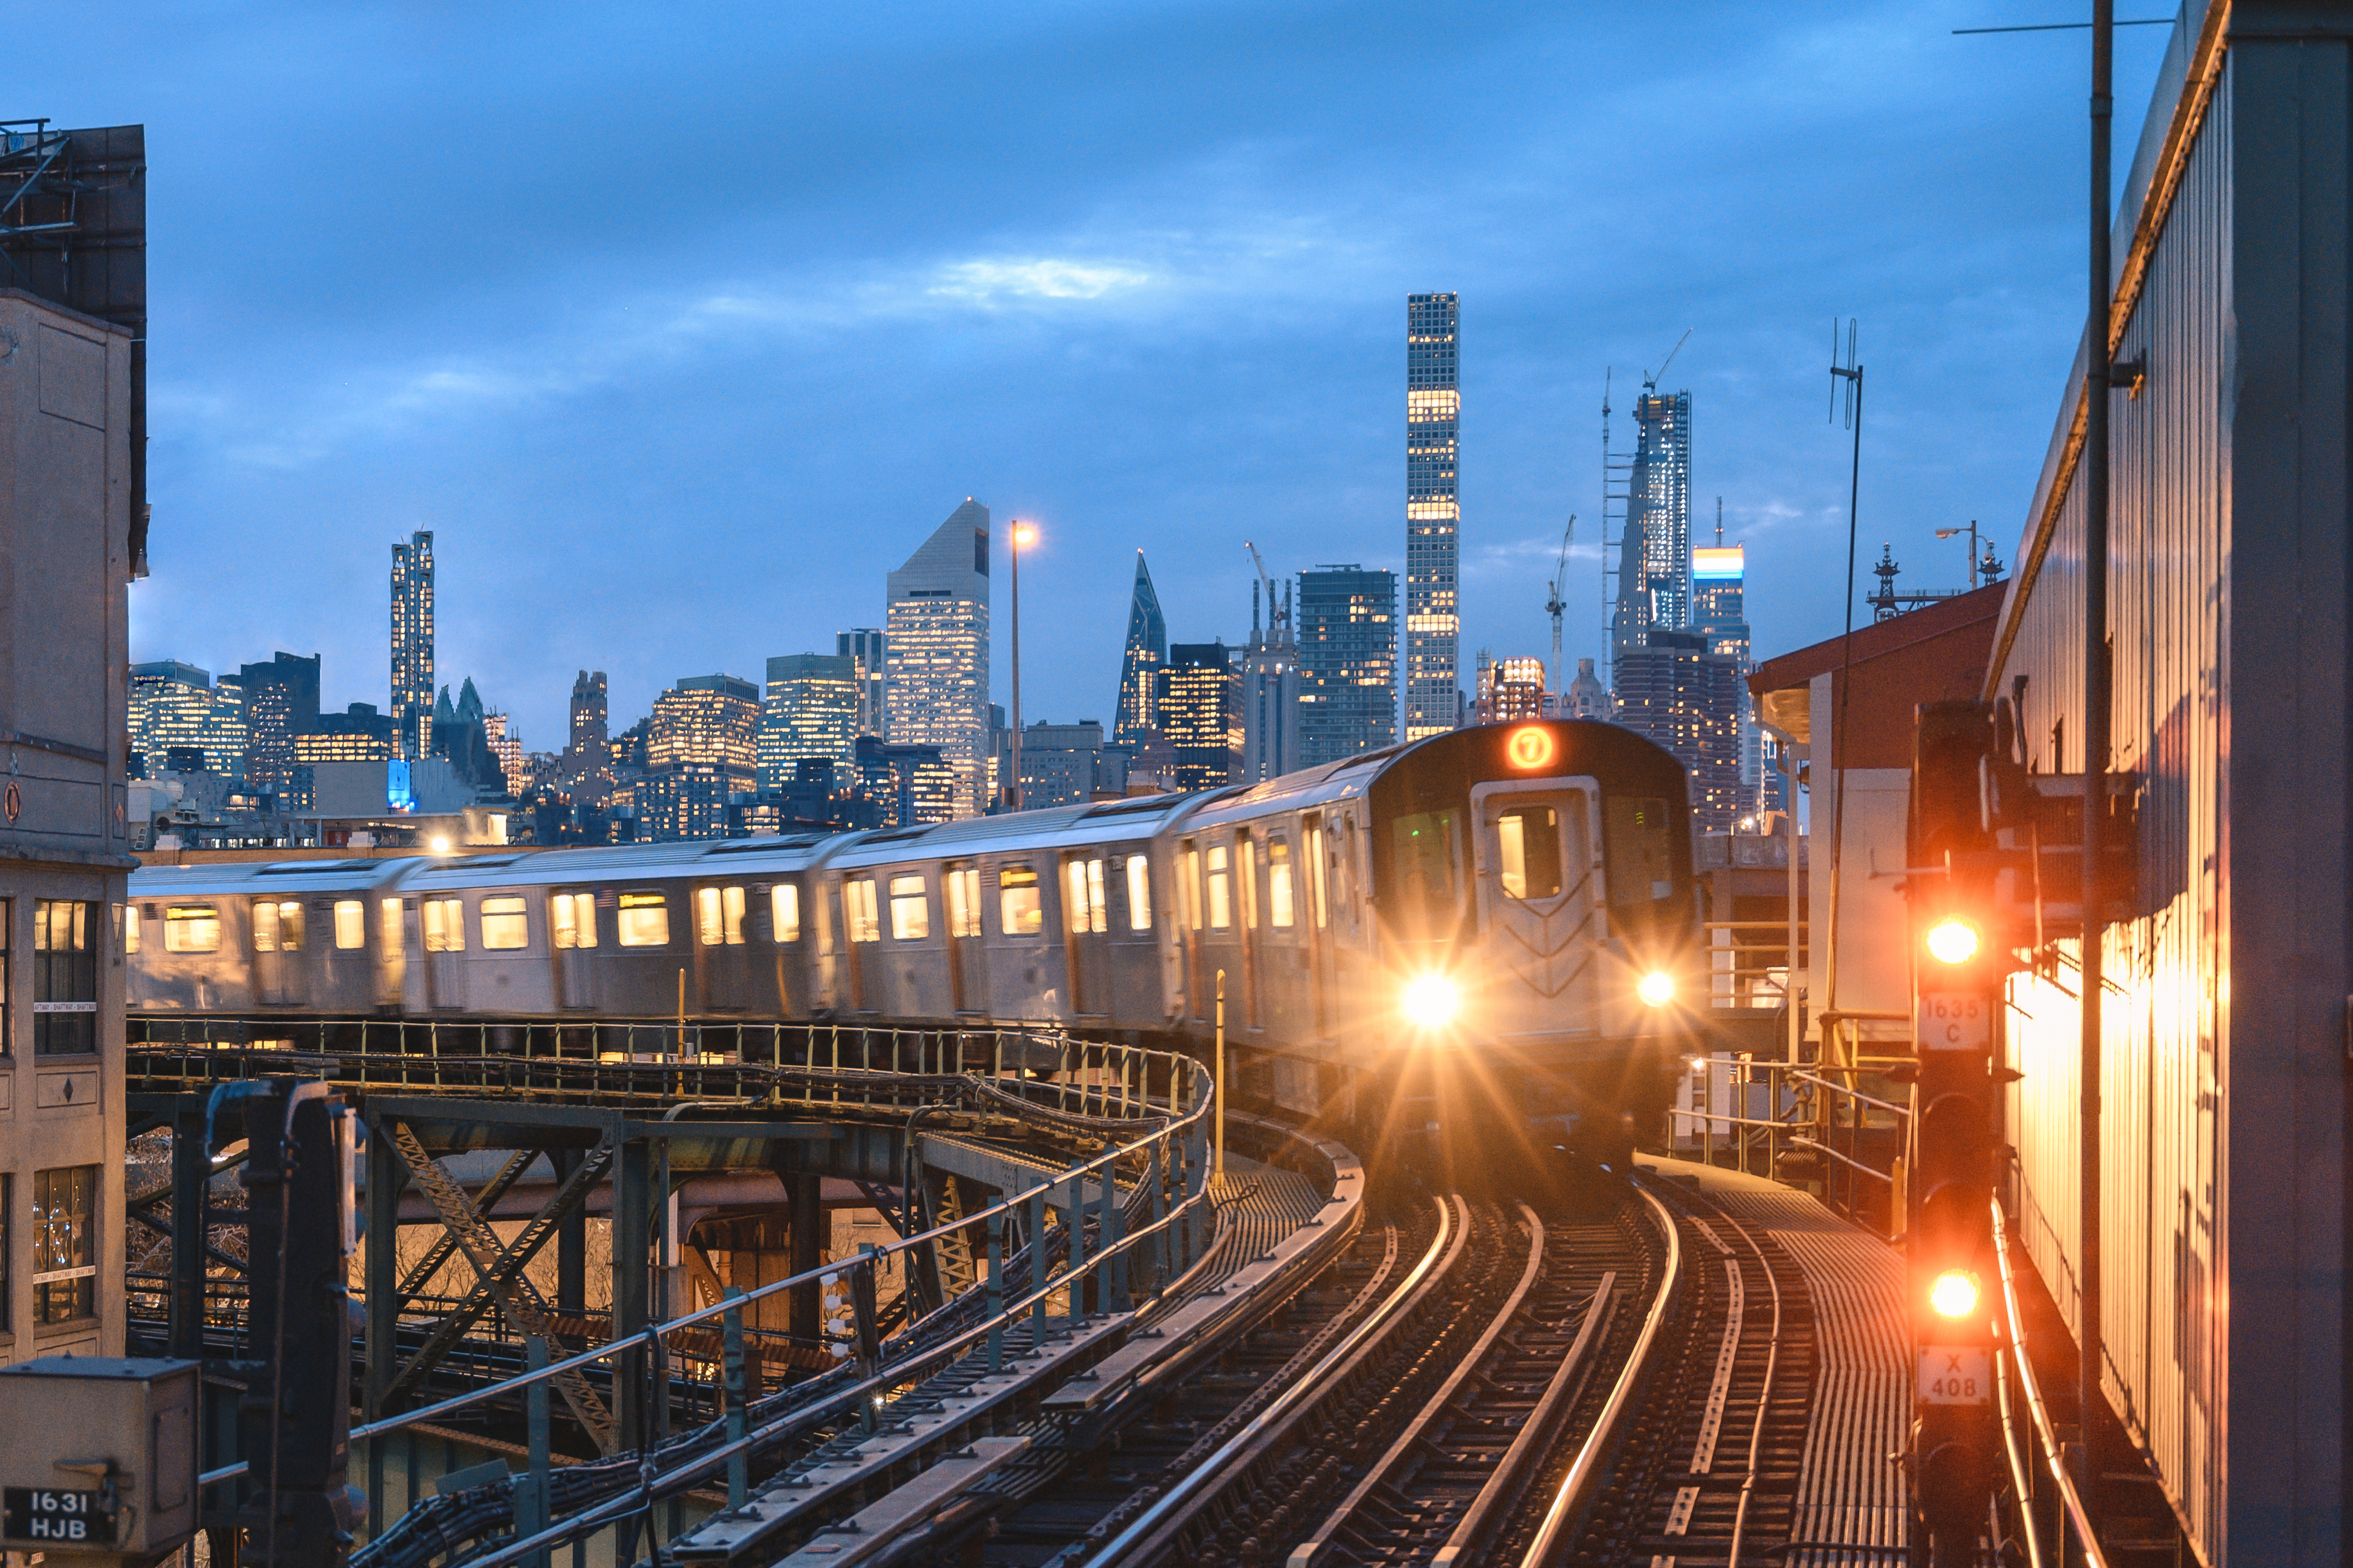 A train on elevated tracks with city skyline in the background at dusk